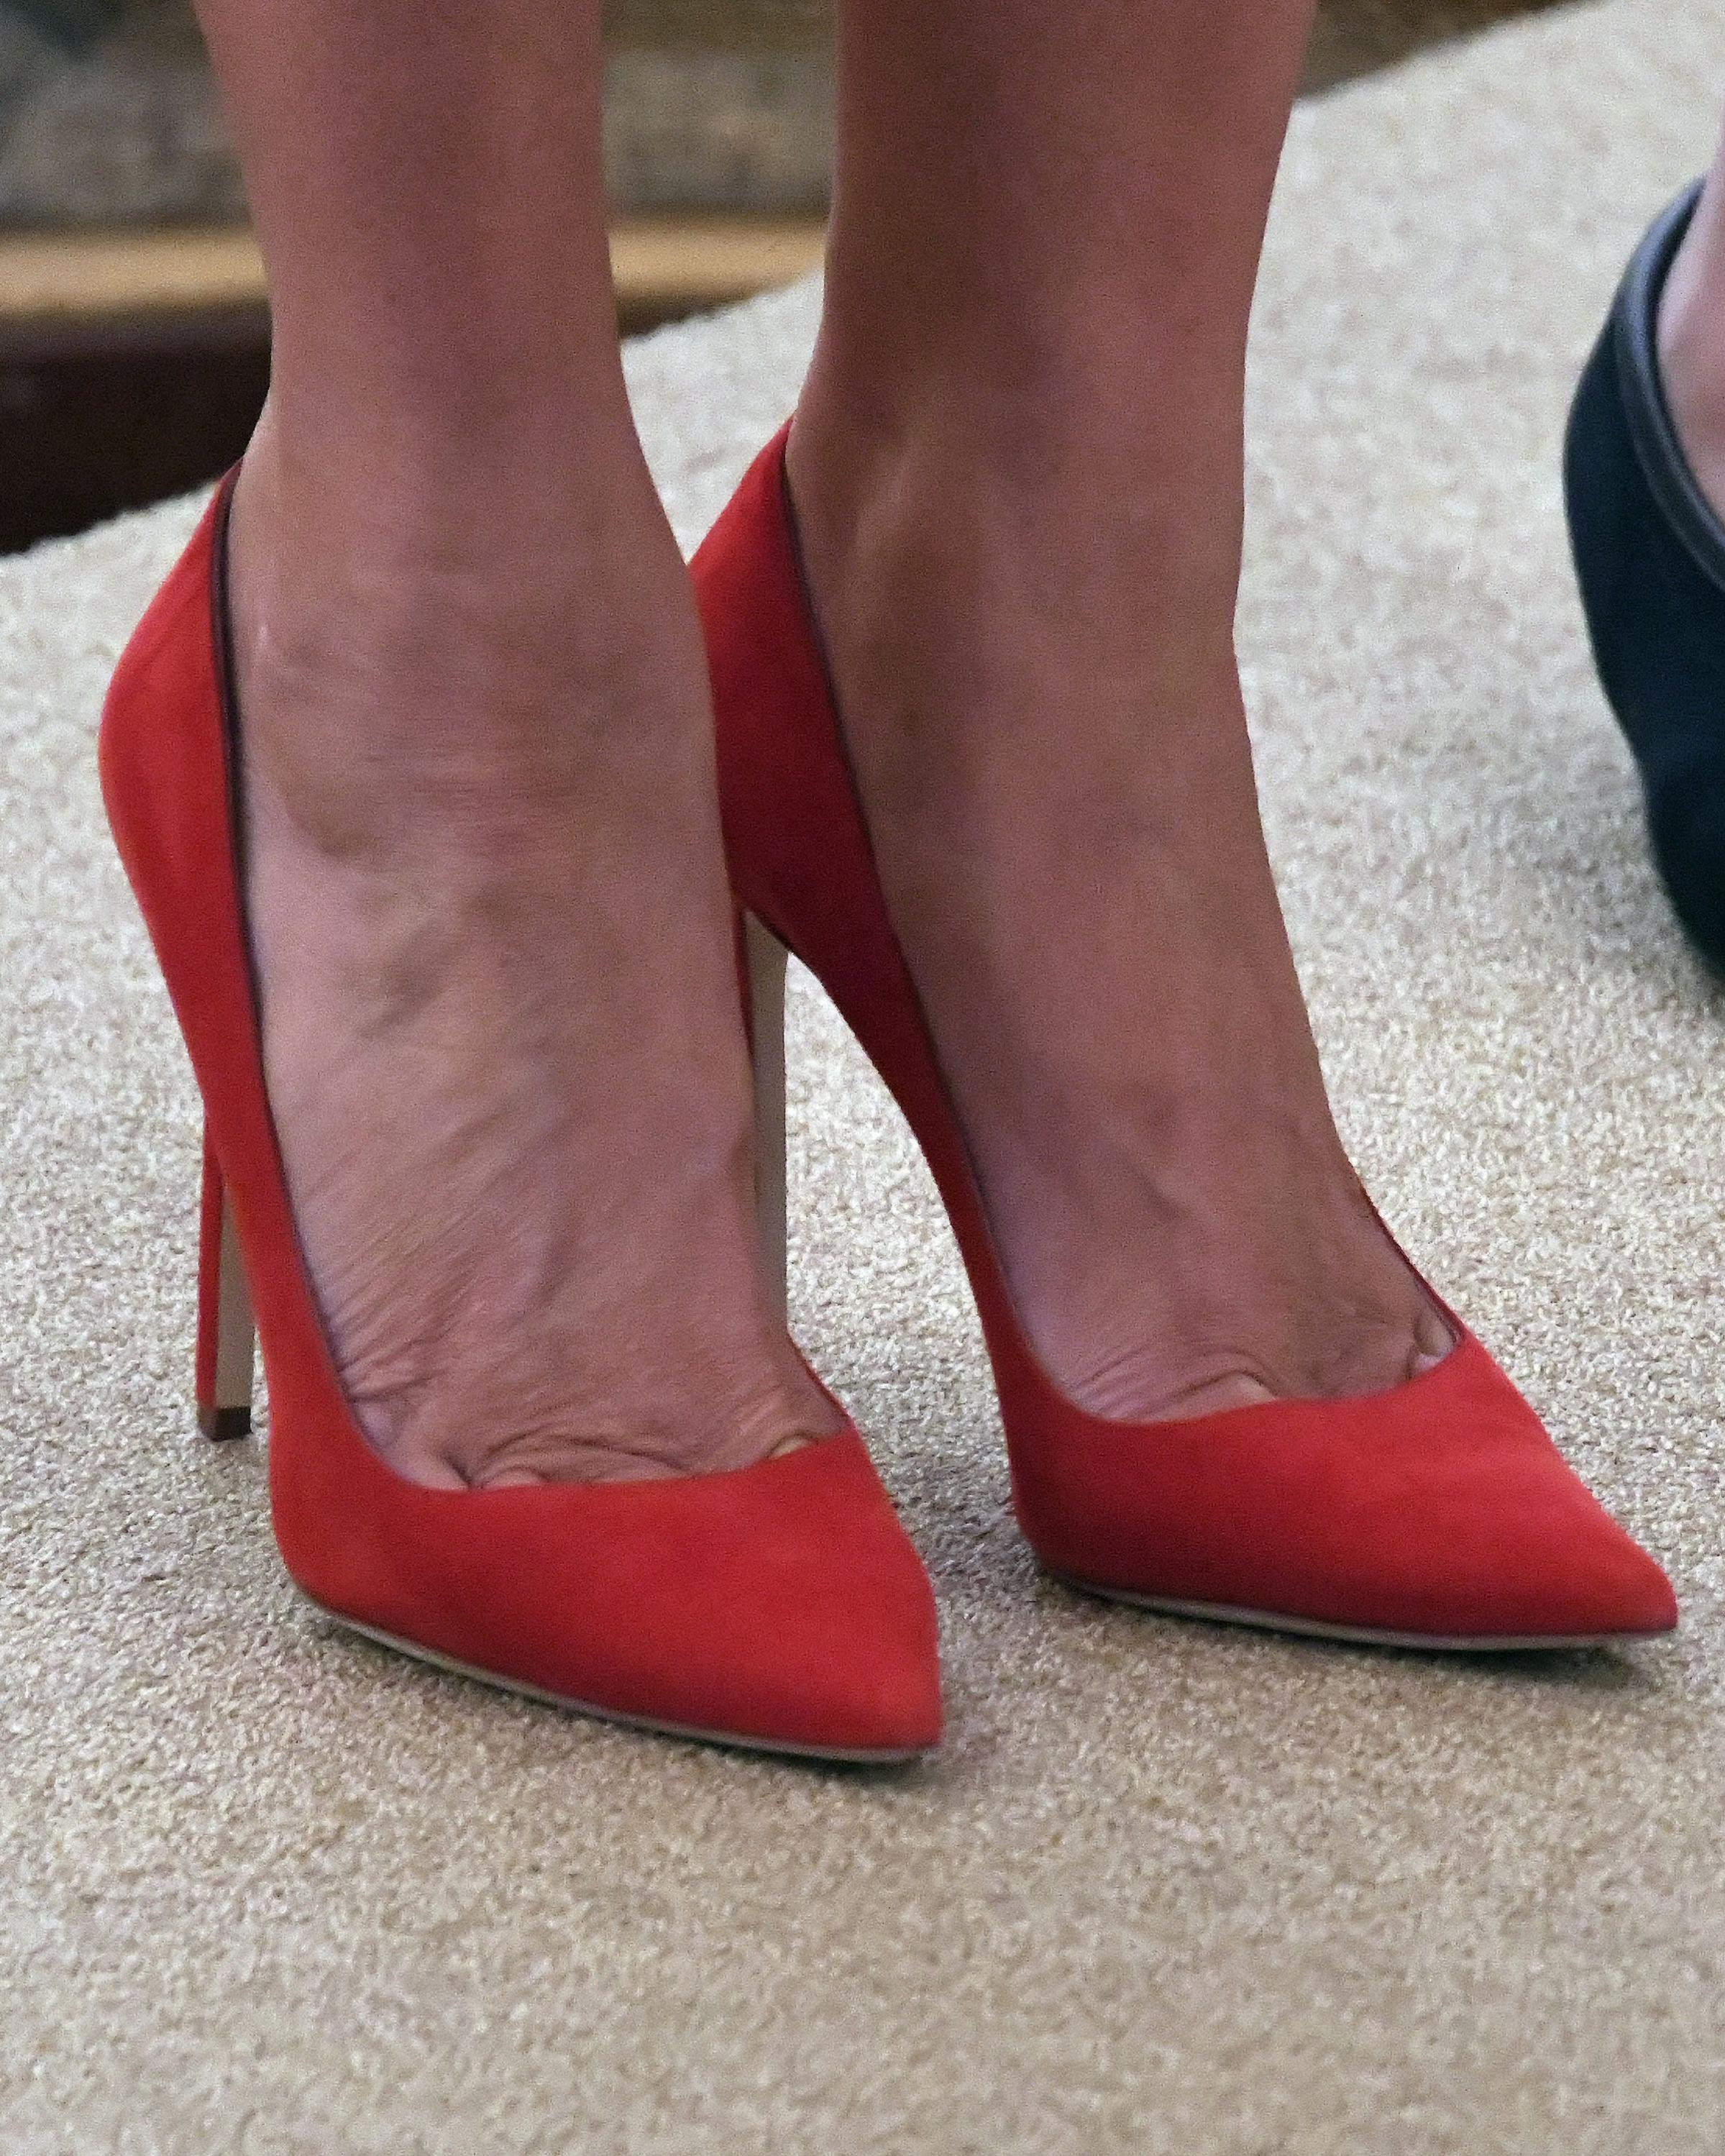 Red shoes worn by first lady Melania Trump as she and United States President Donald J. Trump host a Hispanic Heritage Month at the White House in Washington, DC., Oct. 6, 2017.